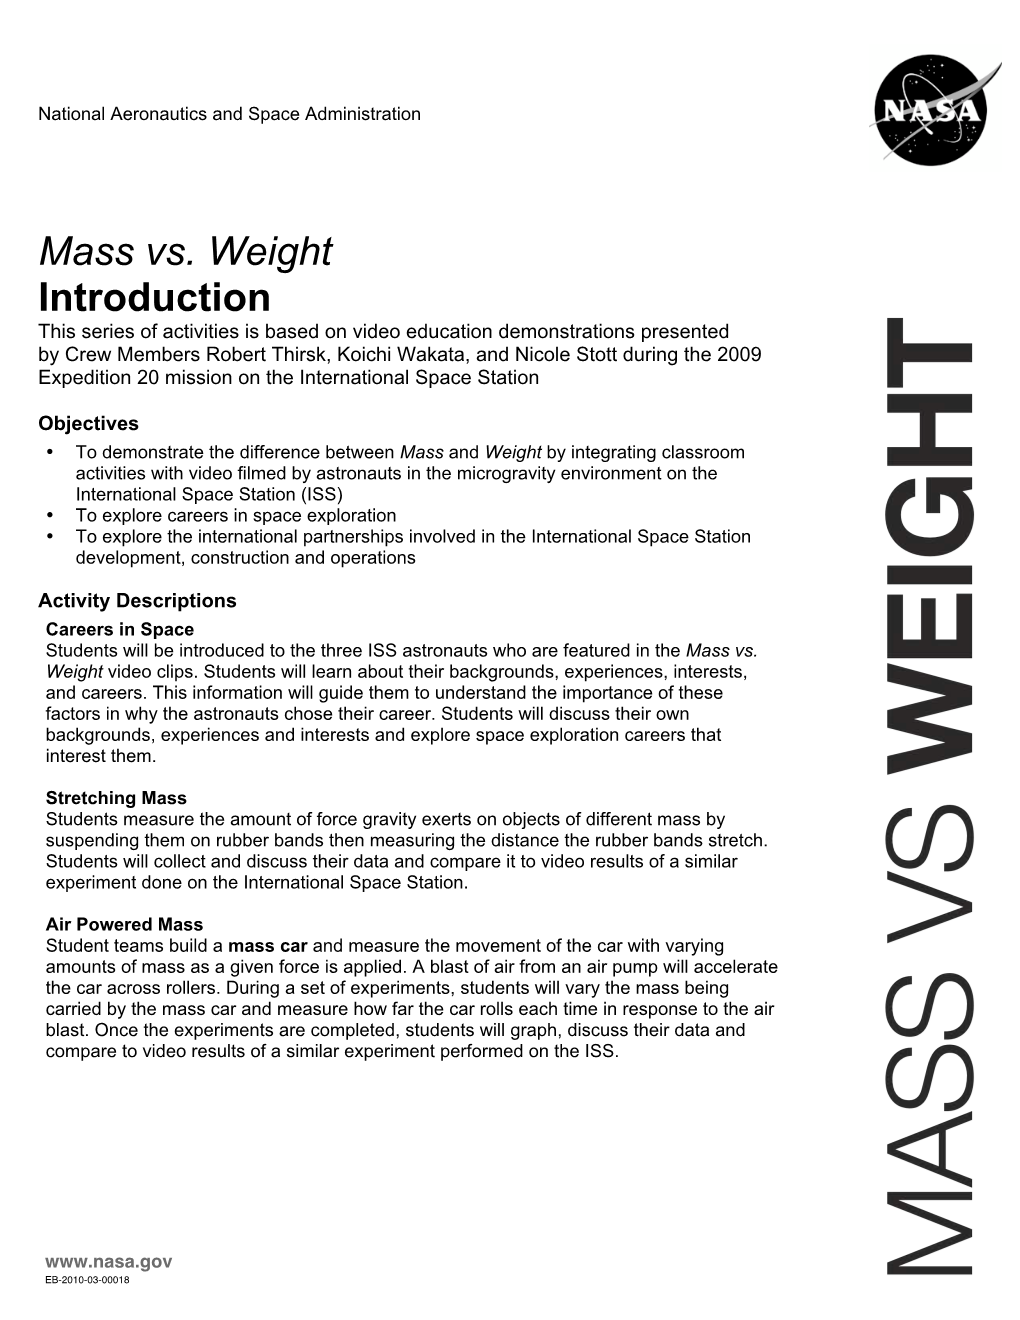 Mass Vs. Weight Introduction